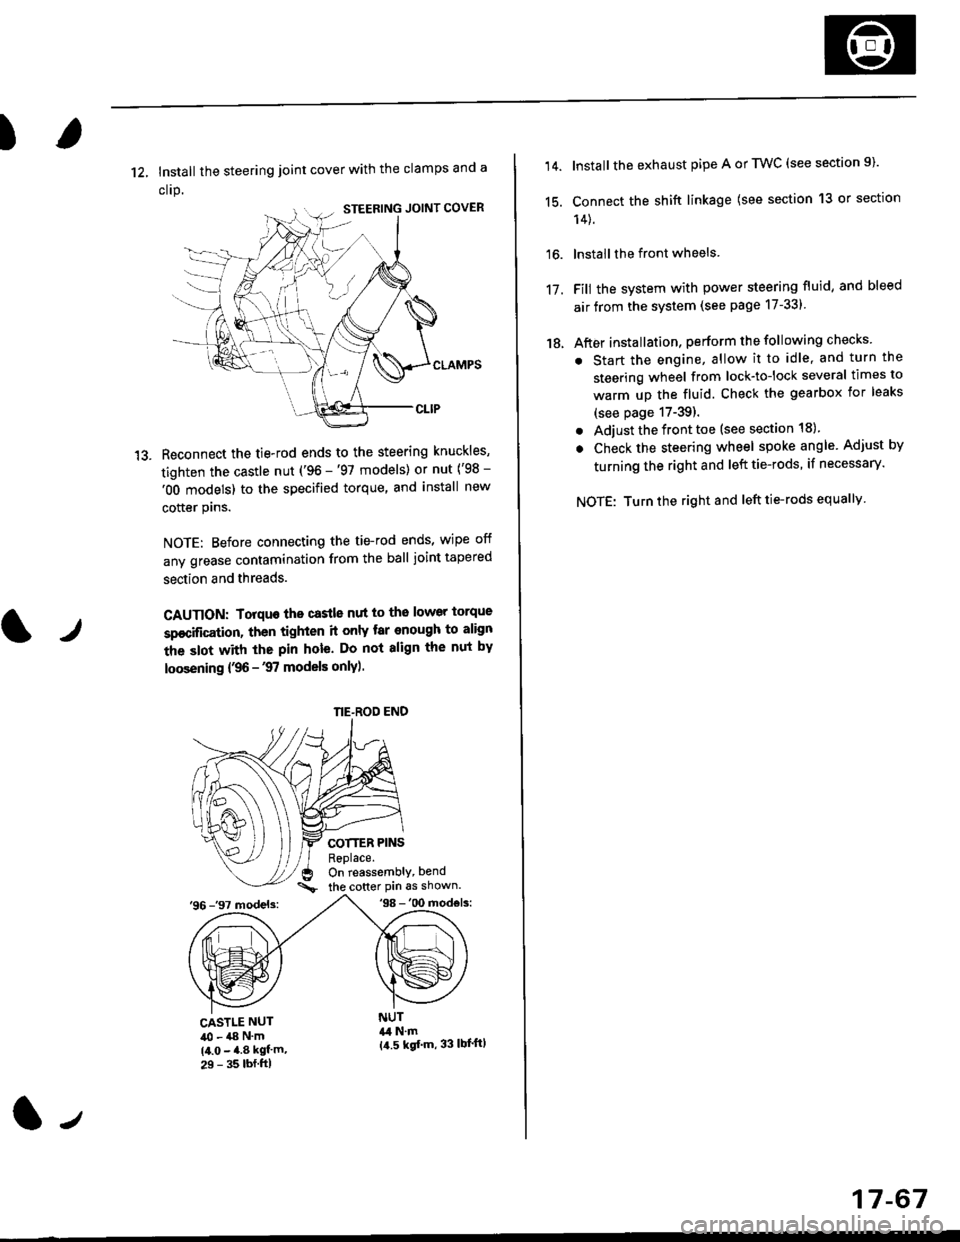 HONDA CIVIC 1999 6.G Workshop Manual )
1?
12, Install the steering joint cover with the clamps and a
clrp.
Reconnect the tie-rod ends to the steering knuckles,
tighten the castle nut (96 -97 models) or nut (98 -
OO models) to the spe